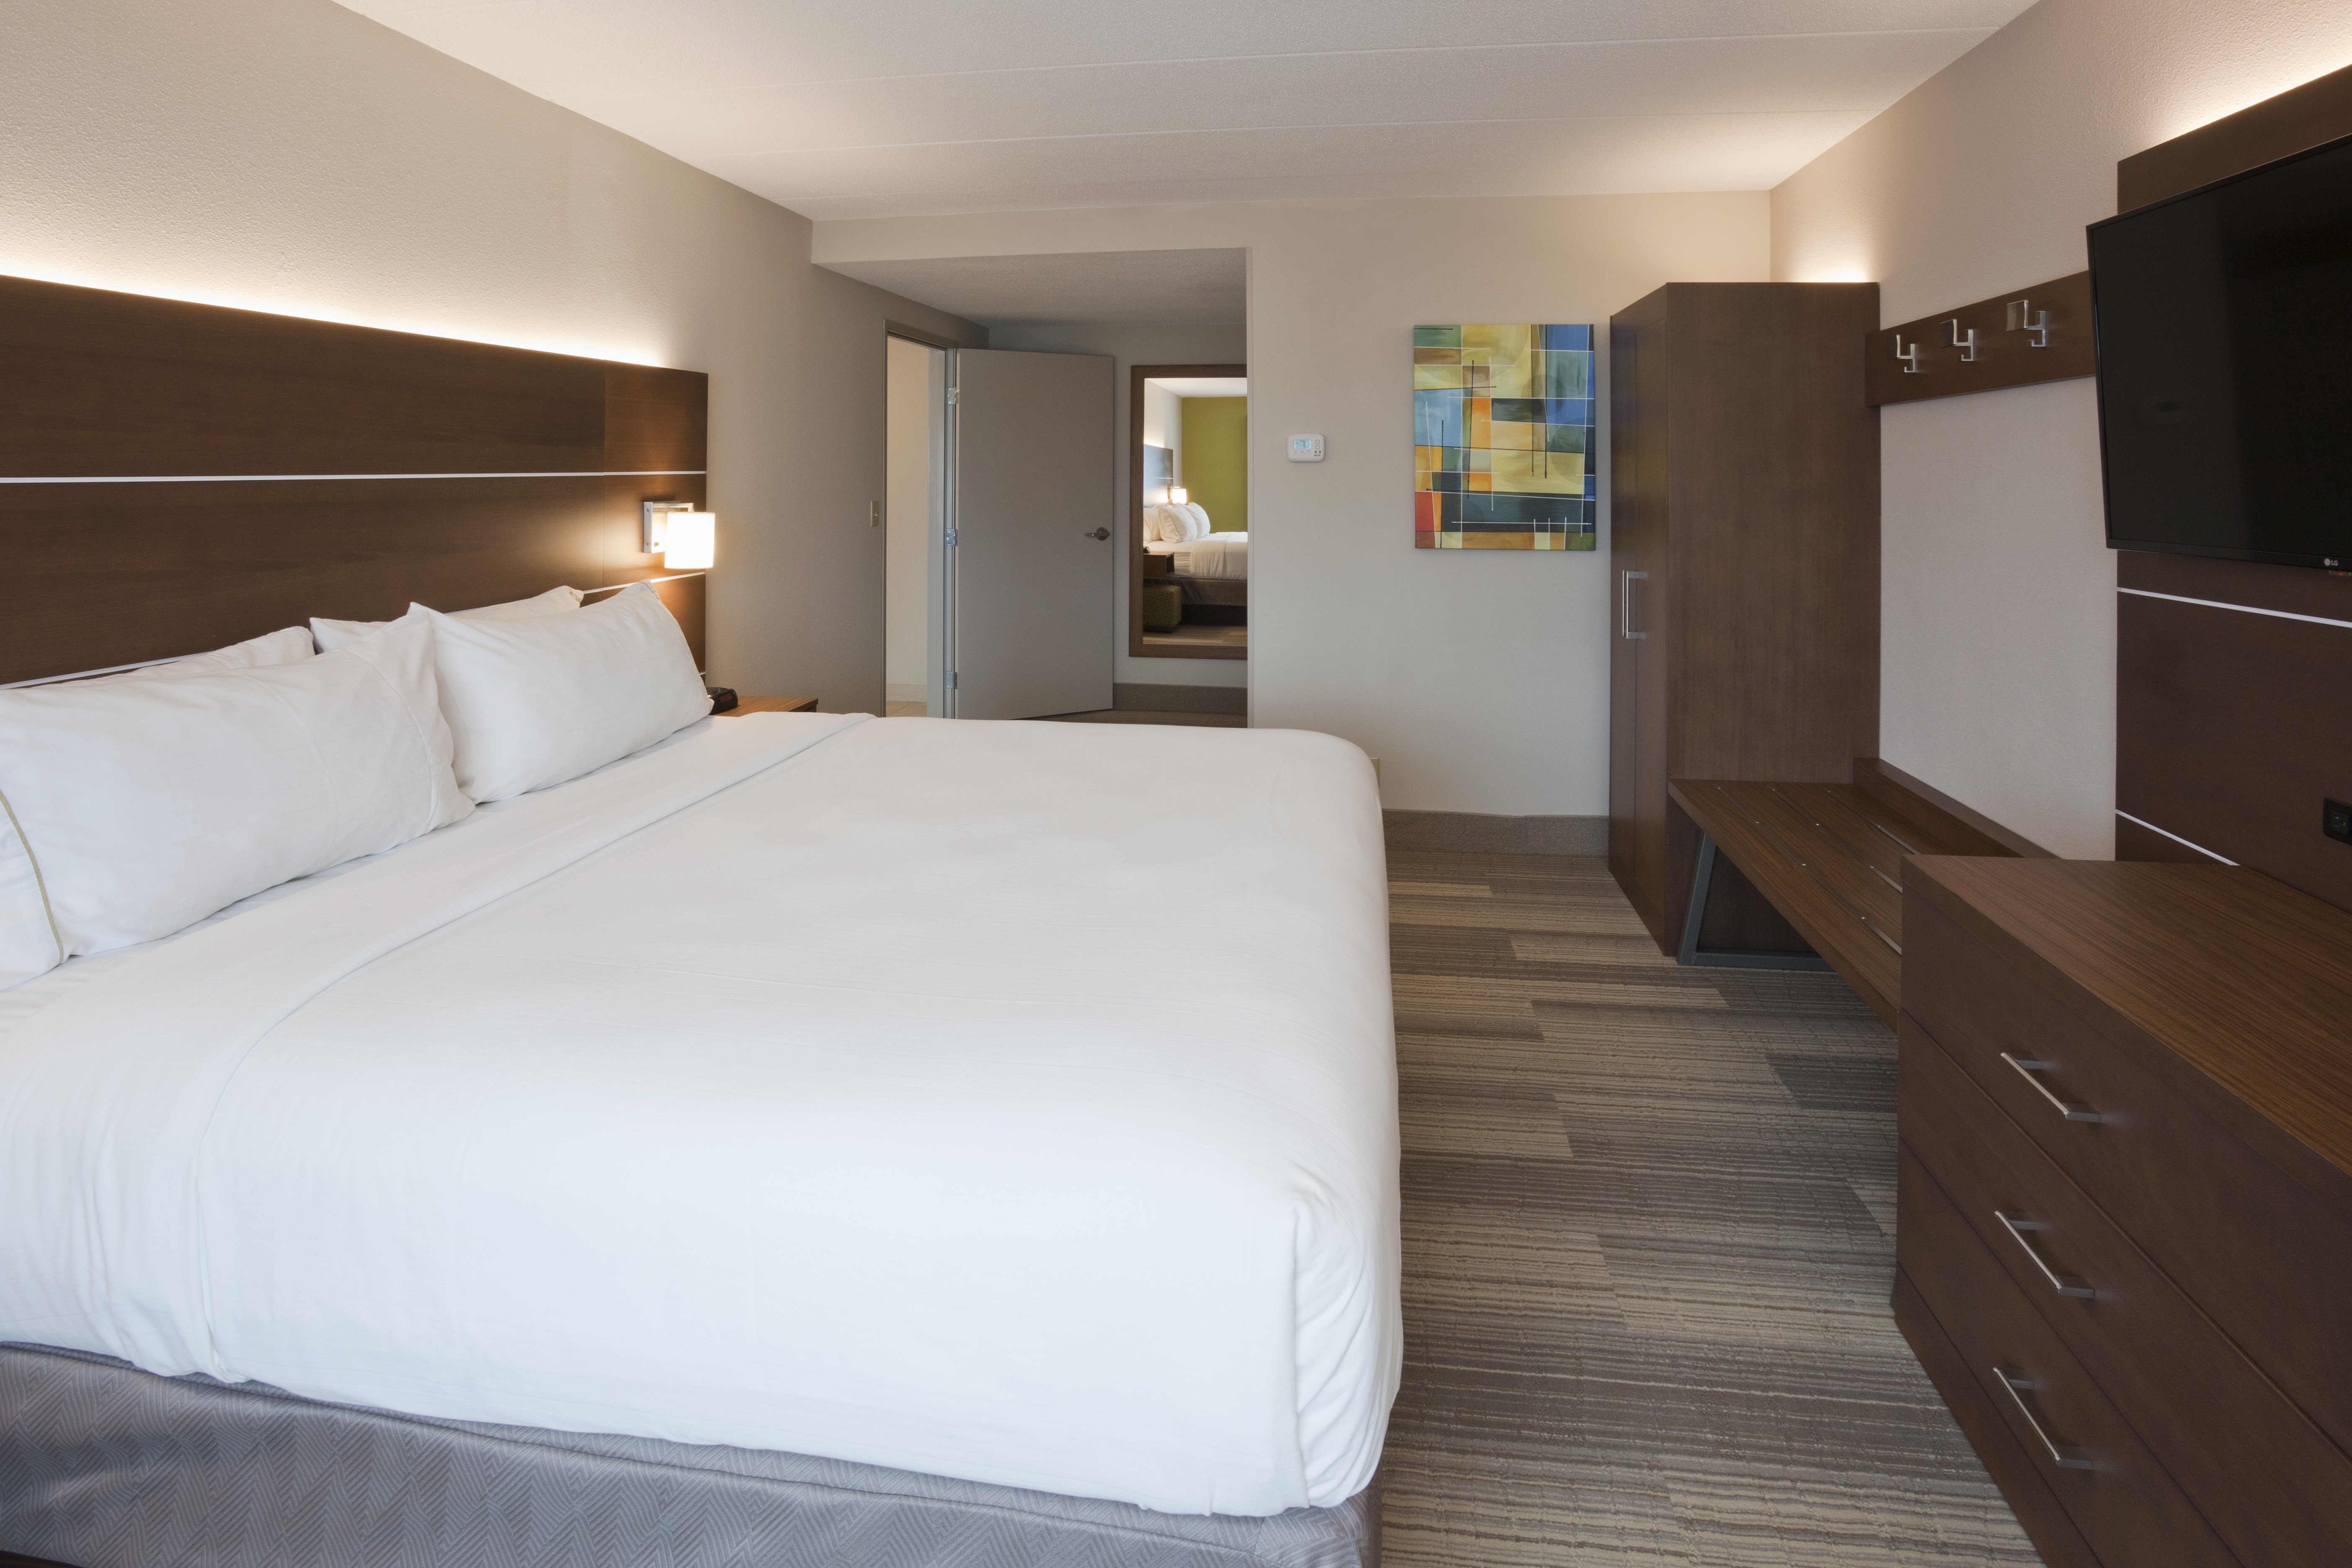 For extra space on your trip, reserve our King Suite.